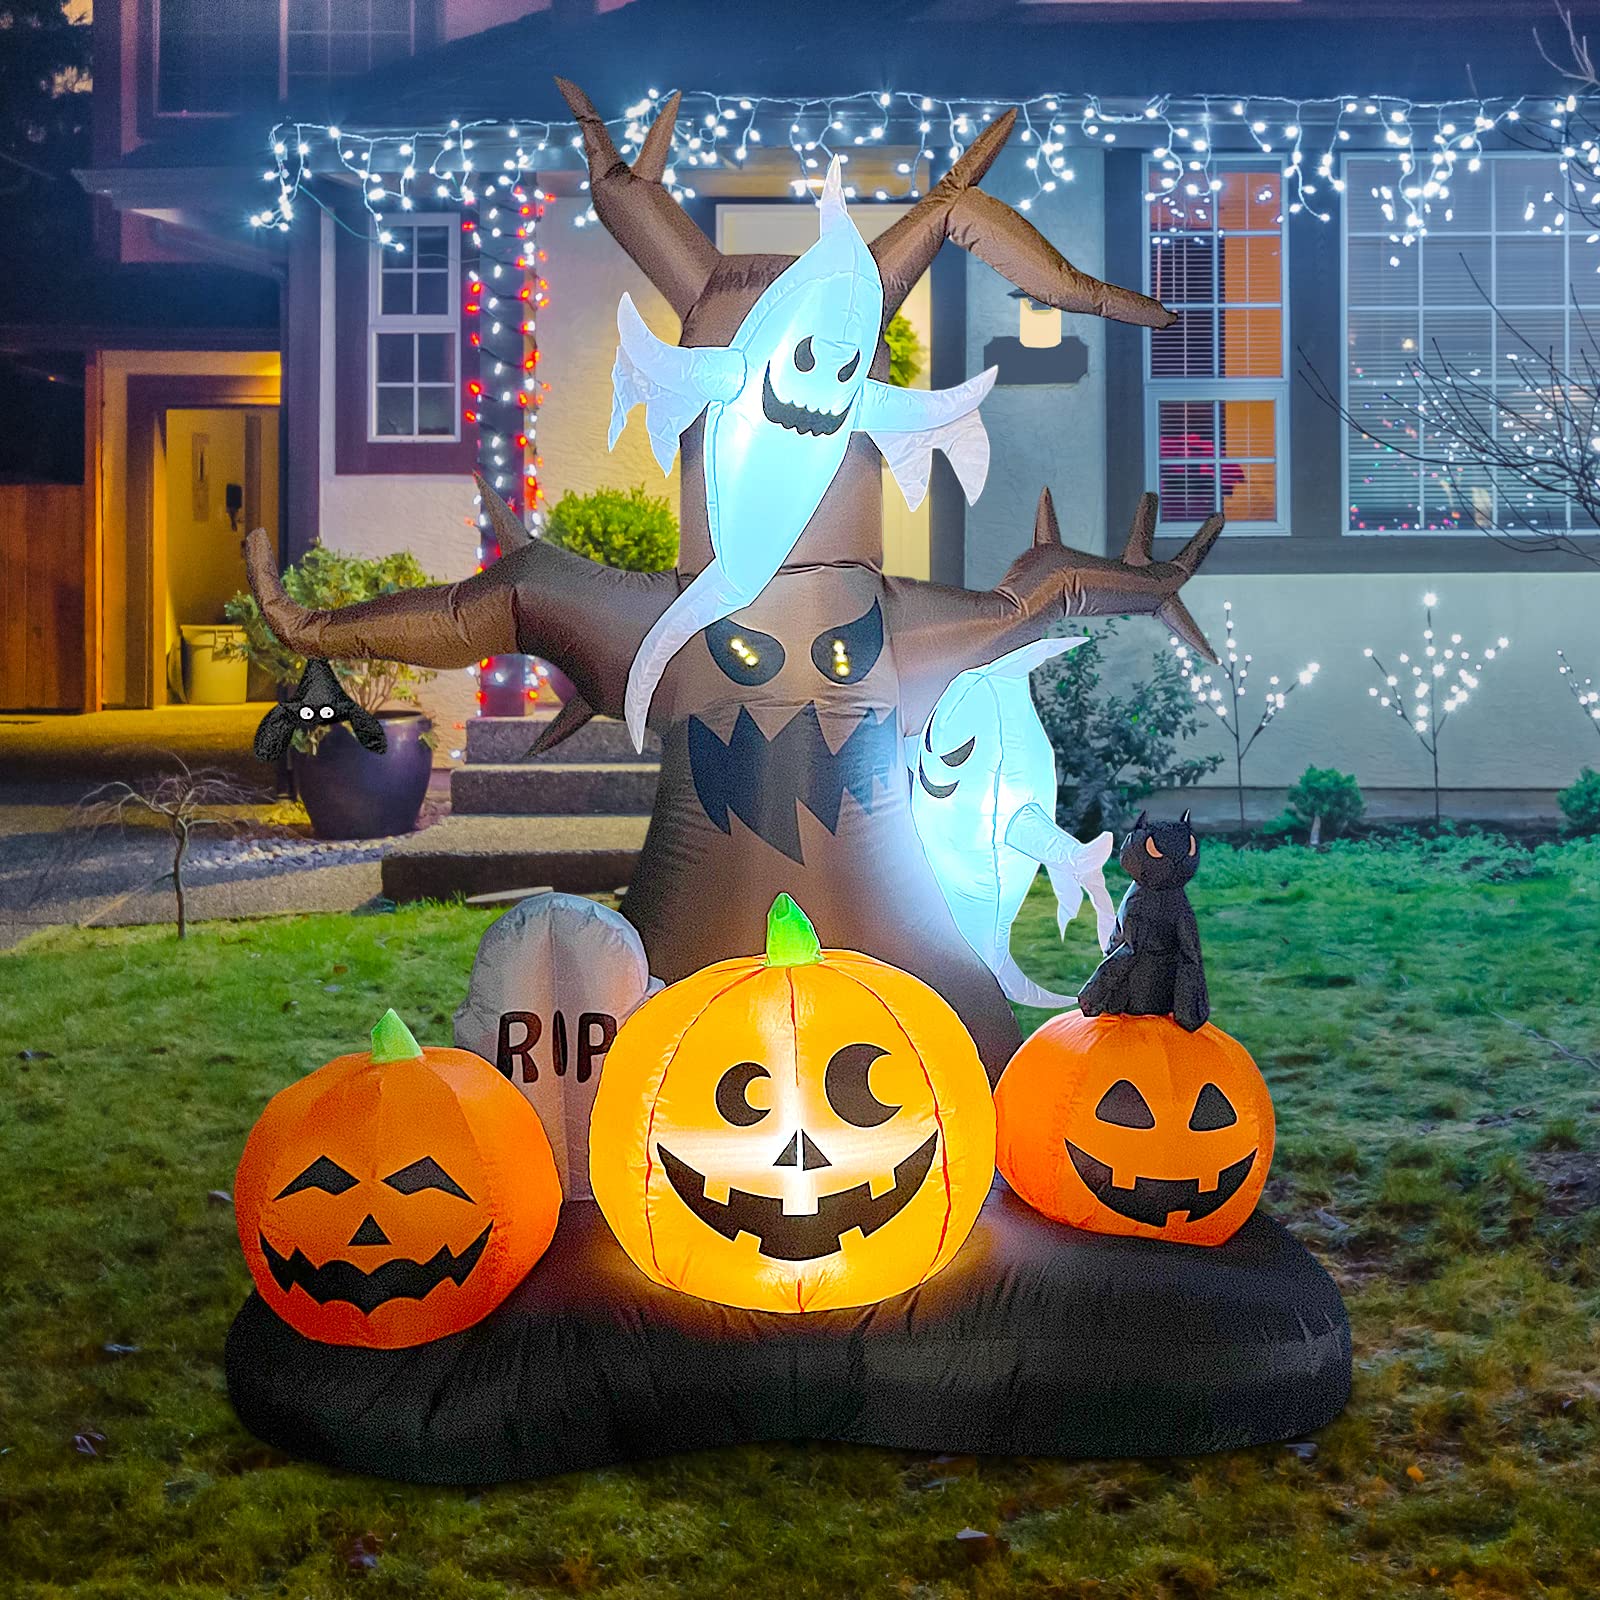 CASAINC 8 Feet Inflatable Halloween Dead Tree Blow Up Ghost with Built-in LED Lights